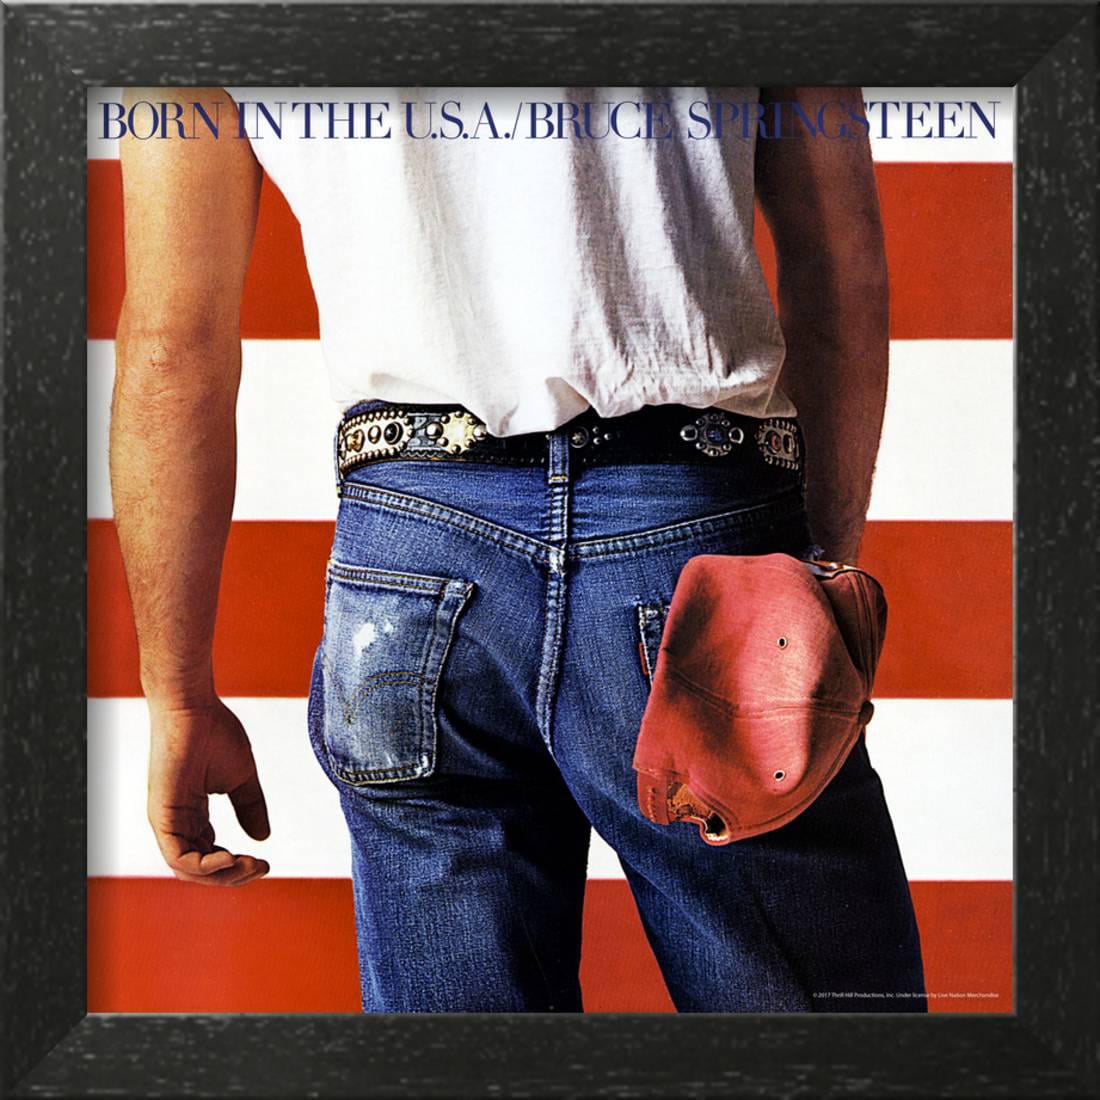 BRUCE SPRINGSTEEN ..."BORN IN THE USA" ...Retro Album Cover Poster Various Sizes 